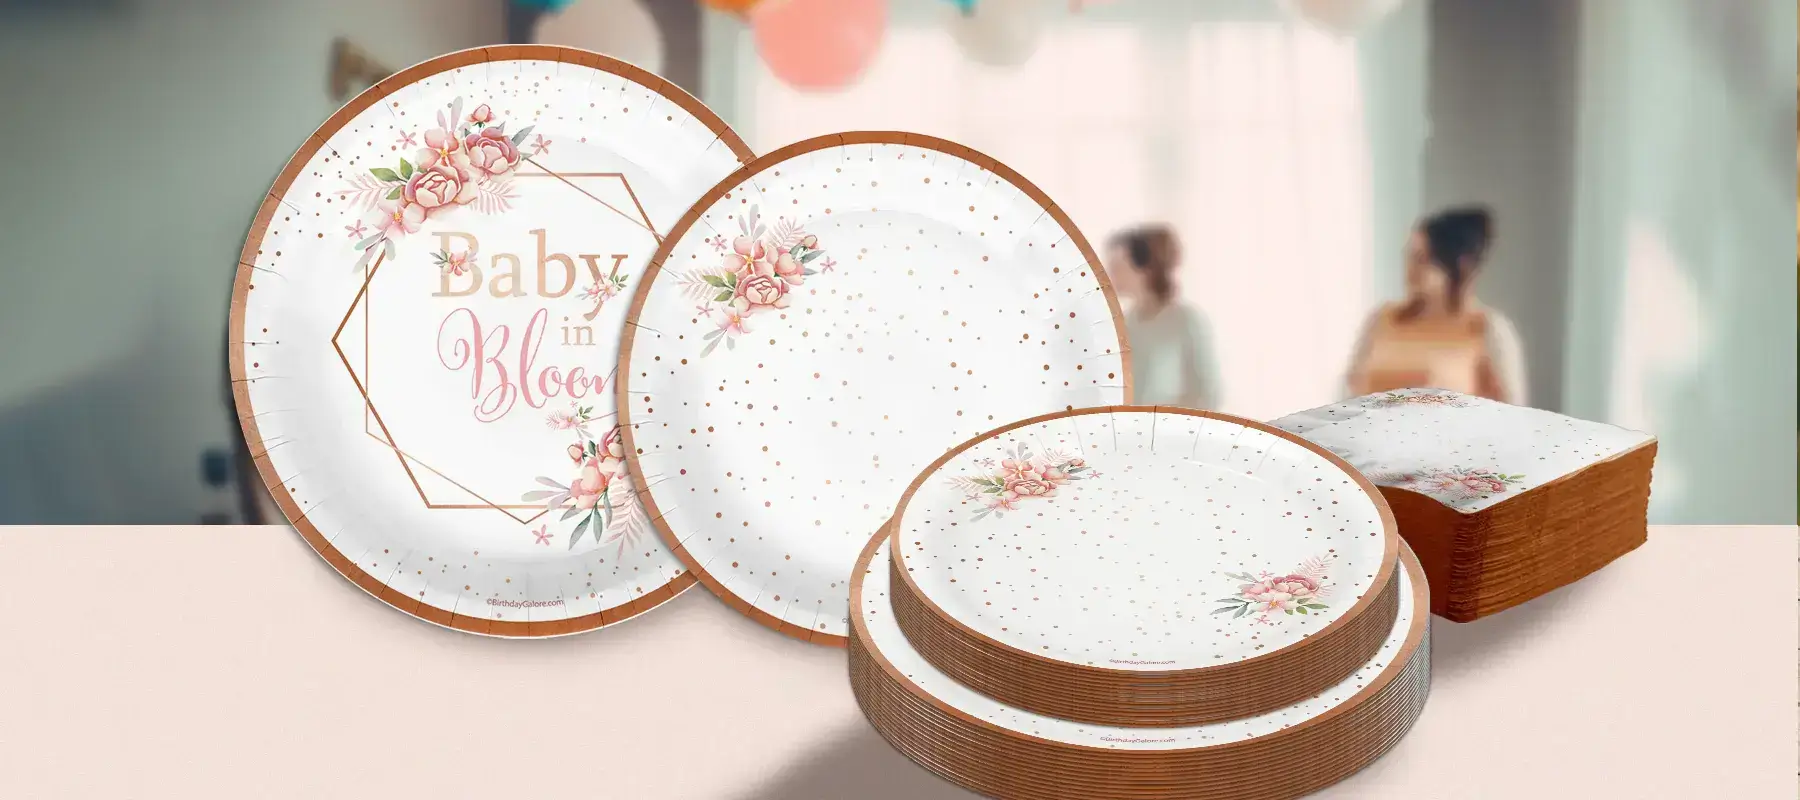 Serves 24 Orange Party Supplies, Disposable Paper Plates, Cups, and Napkins  for Birthday Party, Celebration, Picnic, Summer Event, Baby Shower, Gender